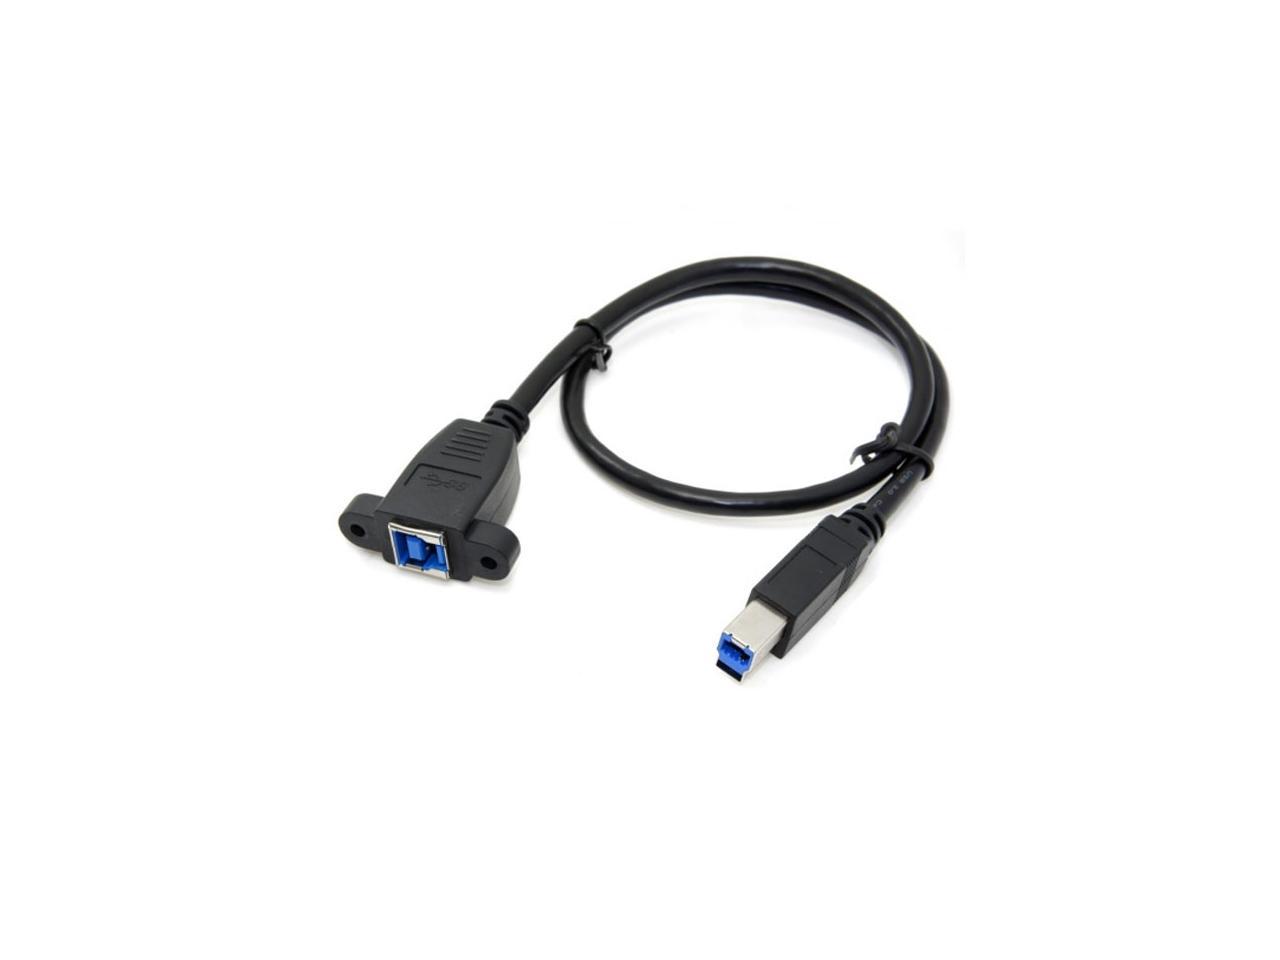 Generic Jimier CY Cable 90 D Right & Left Angled USB 3.1 Male to Female Extension Adapter for Laptop 